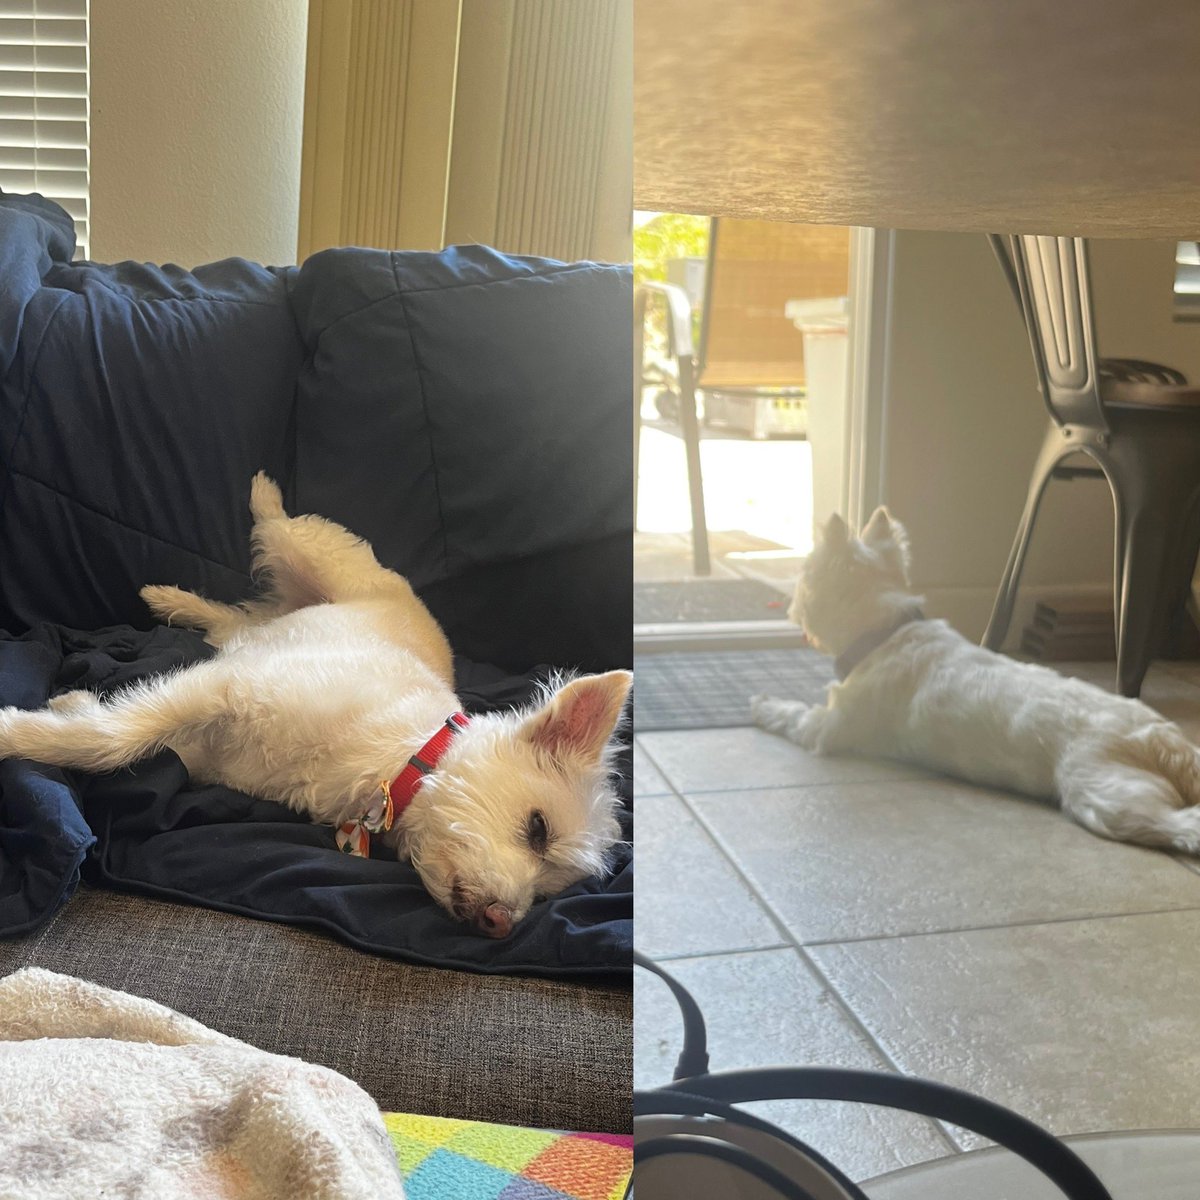 Grandma took good care of the grandpuppies while I was gone… but Jasper is happy to be back on his couch, and Toby is eagerly stalking lizards from inside where it is cooler after a week of letting them roam free. Lol.